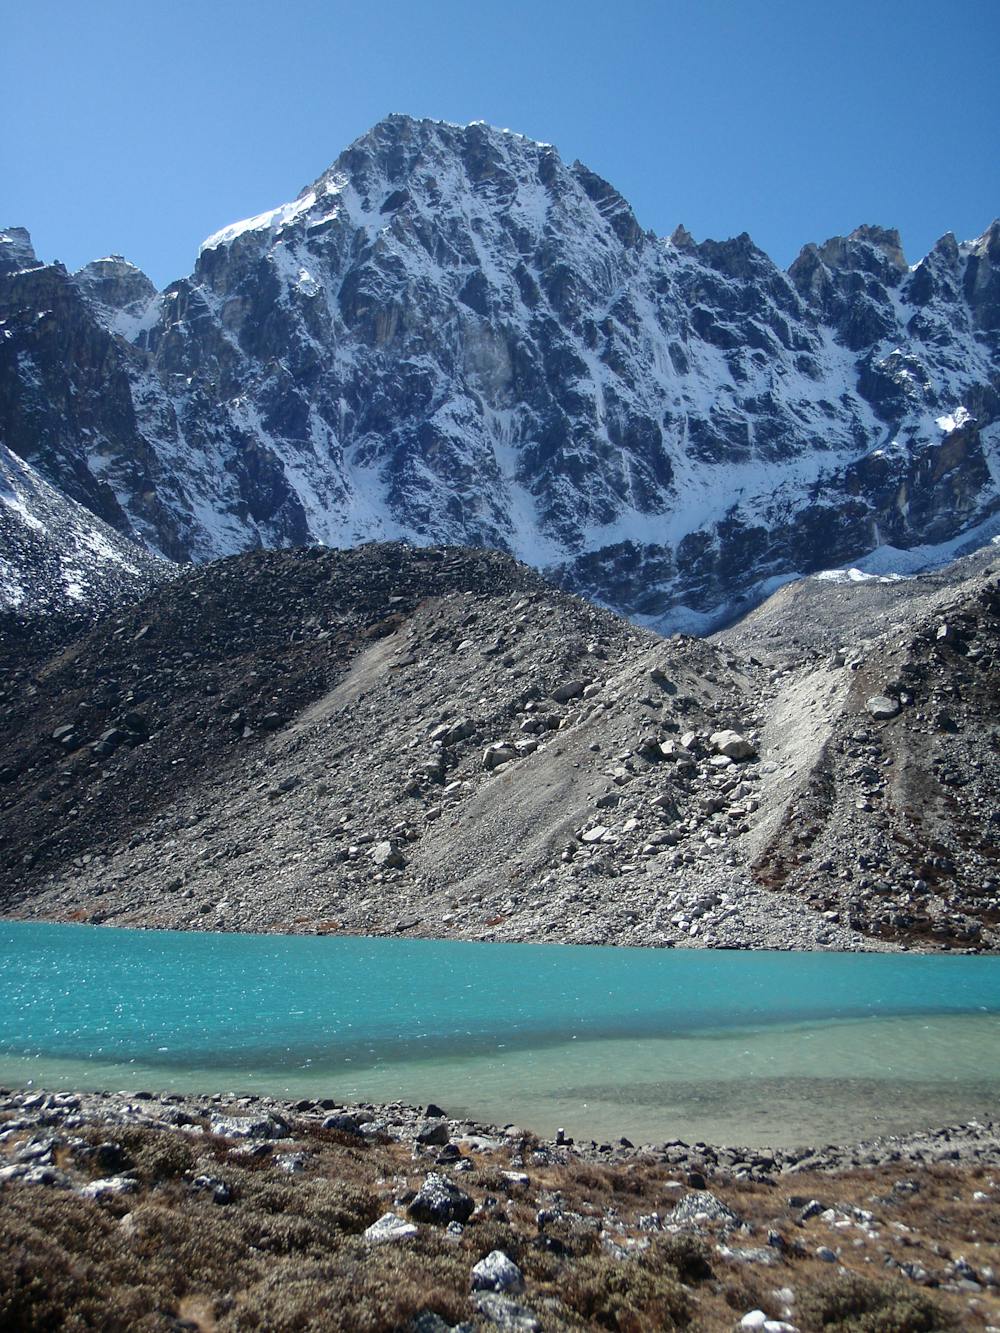 Looking across to Machermo Peak just after departing Gokyo for the glacier crossing to Dragnag.